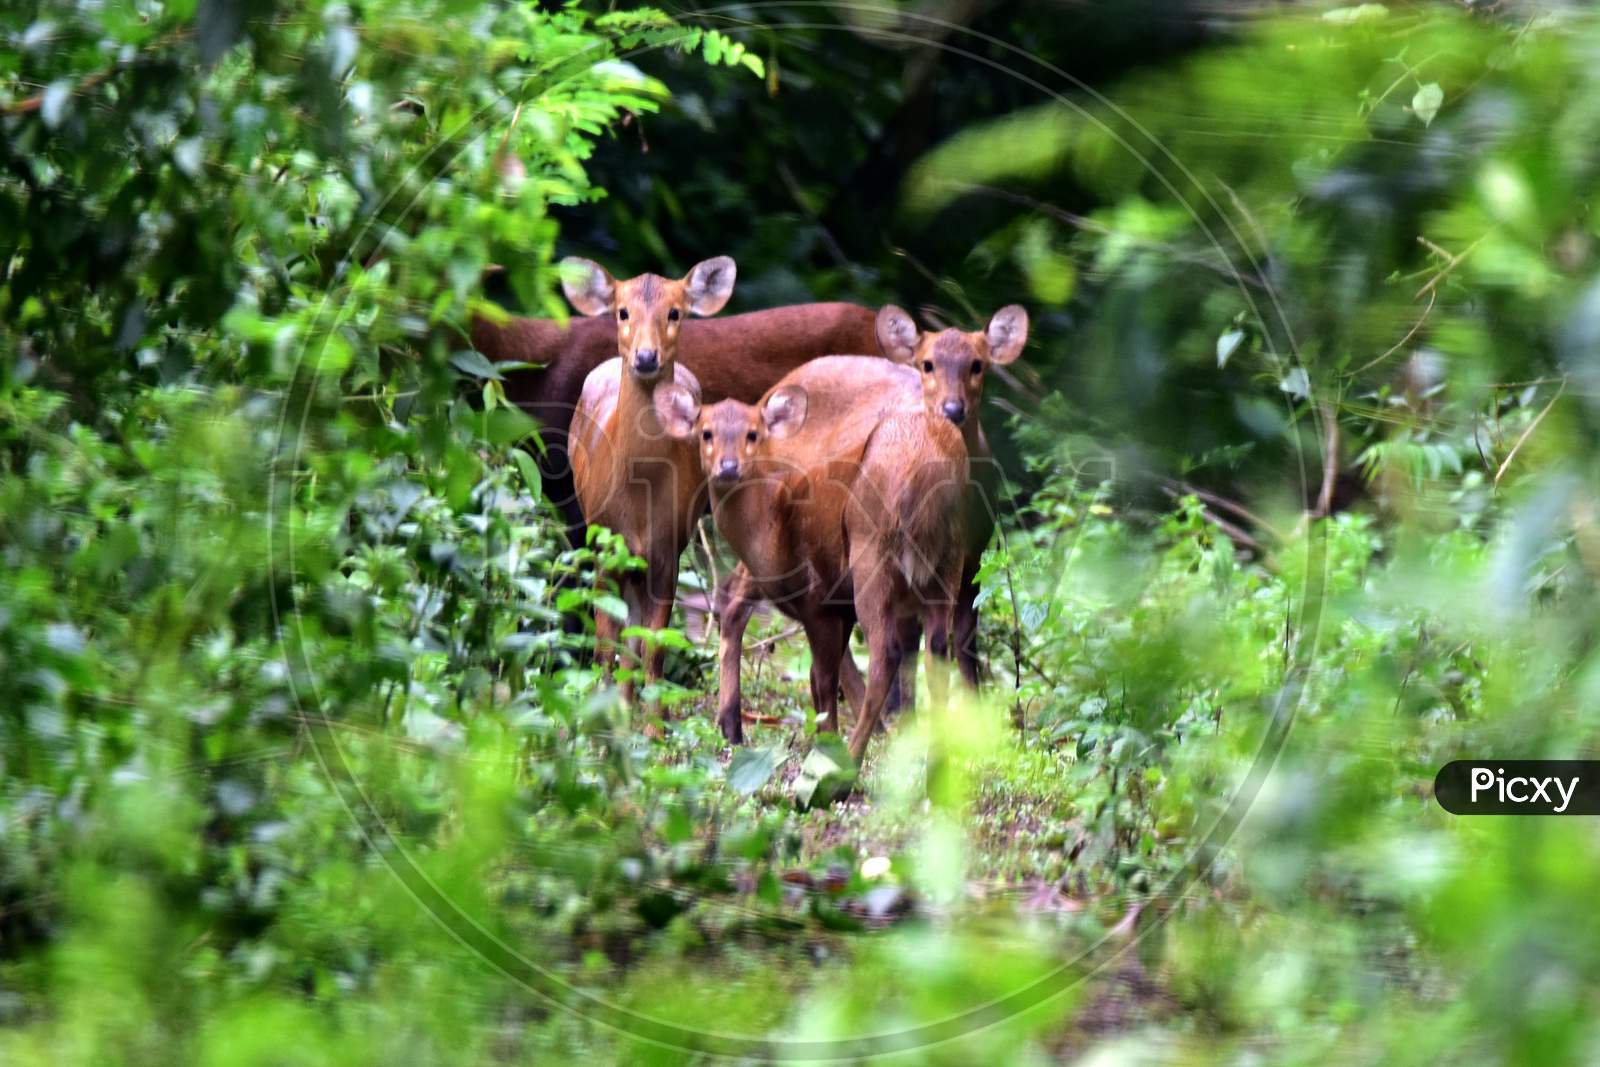 A herd of deers takes shelter on high ground in flood-affected areas of the Kaziranga National Park in Nagaon, Assam on July 16, 2020